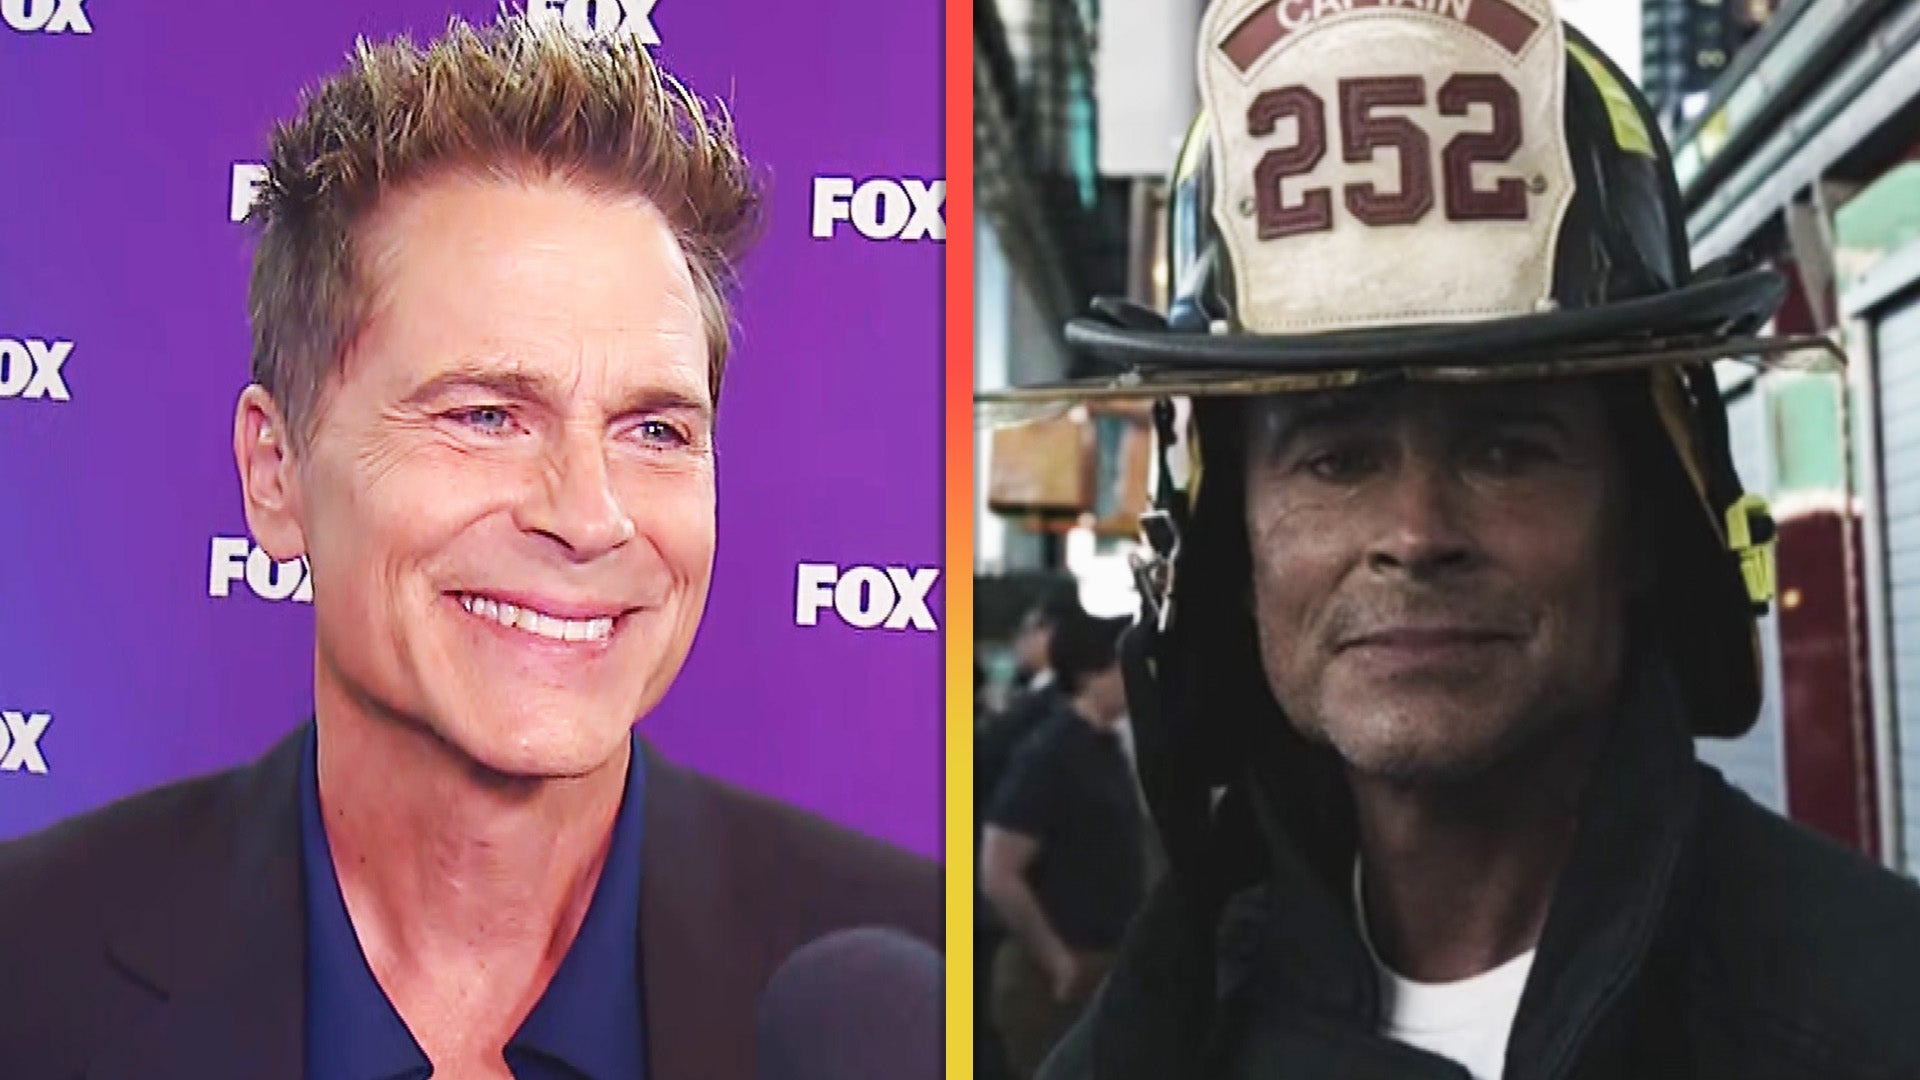 Rob Lowe Wants to Bring Some 'Yellowstone' Vibes to '9-1-1: Lone Star' (Exclusive)